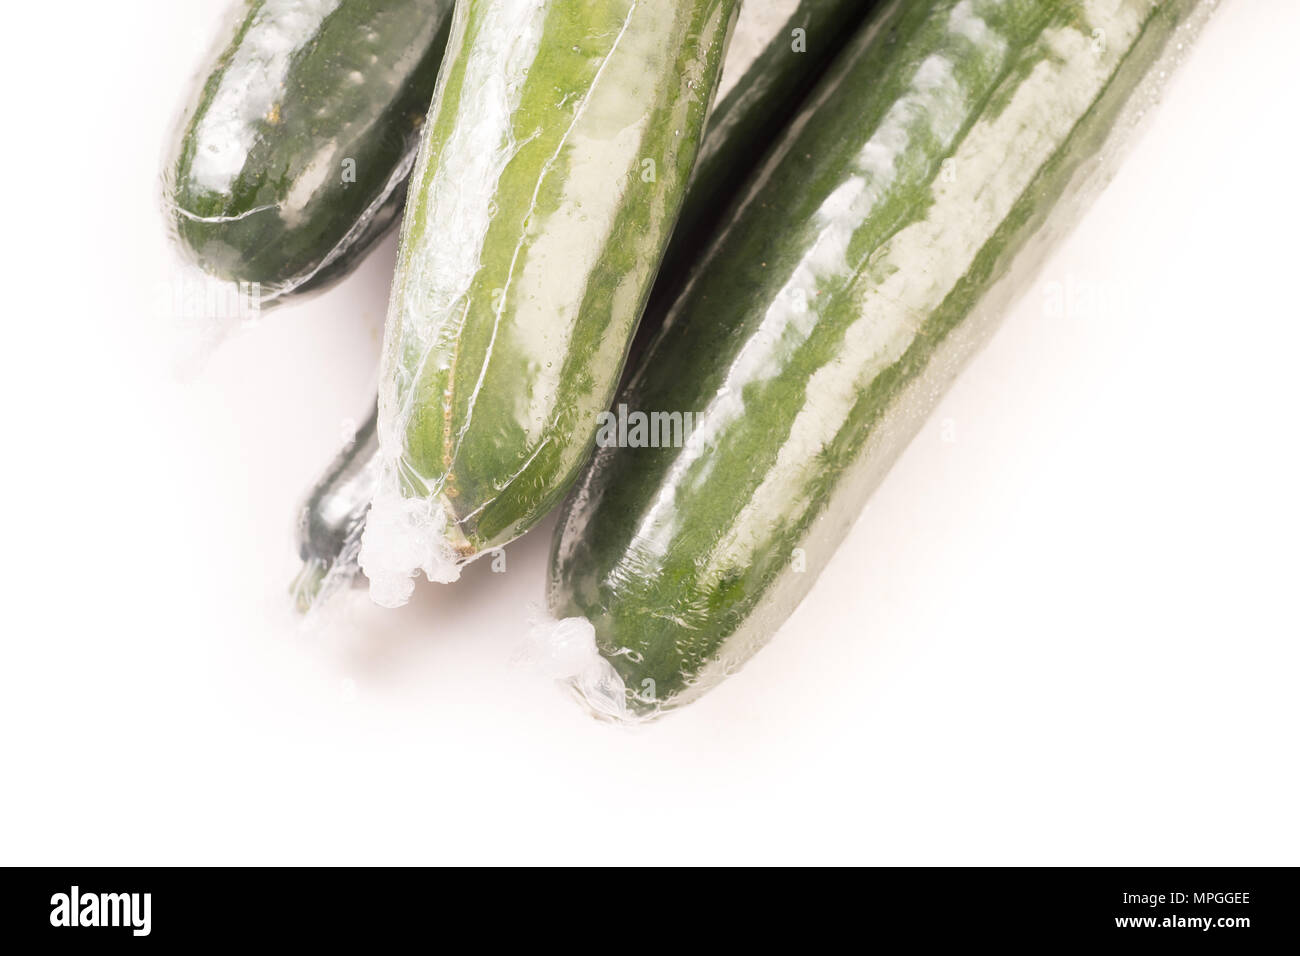 Bunch of cucumber wrapped in plastic films, isolated on white background Stock Photo